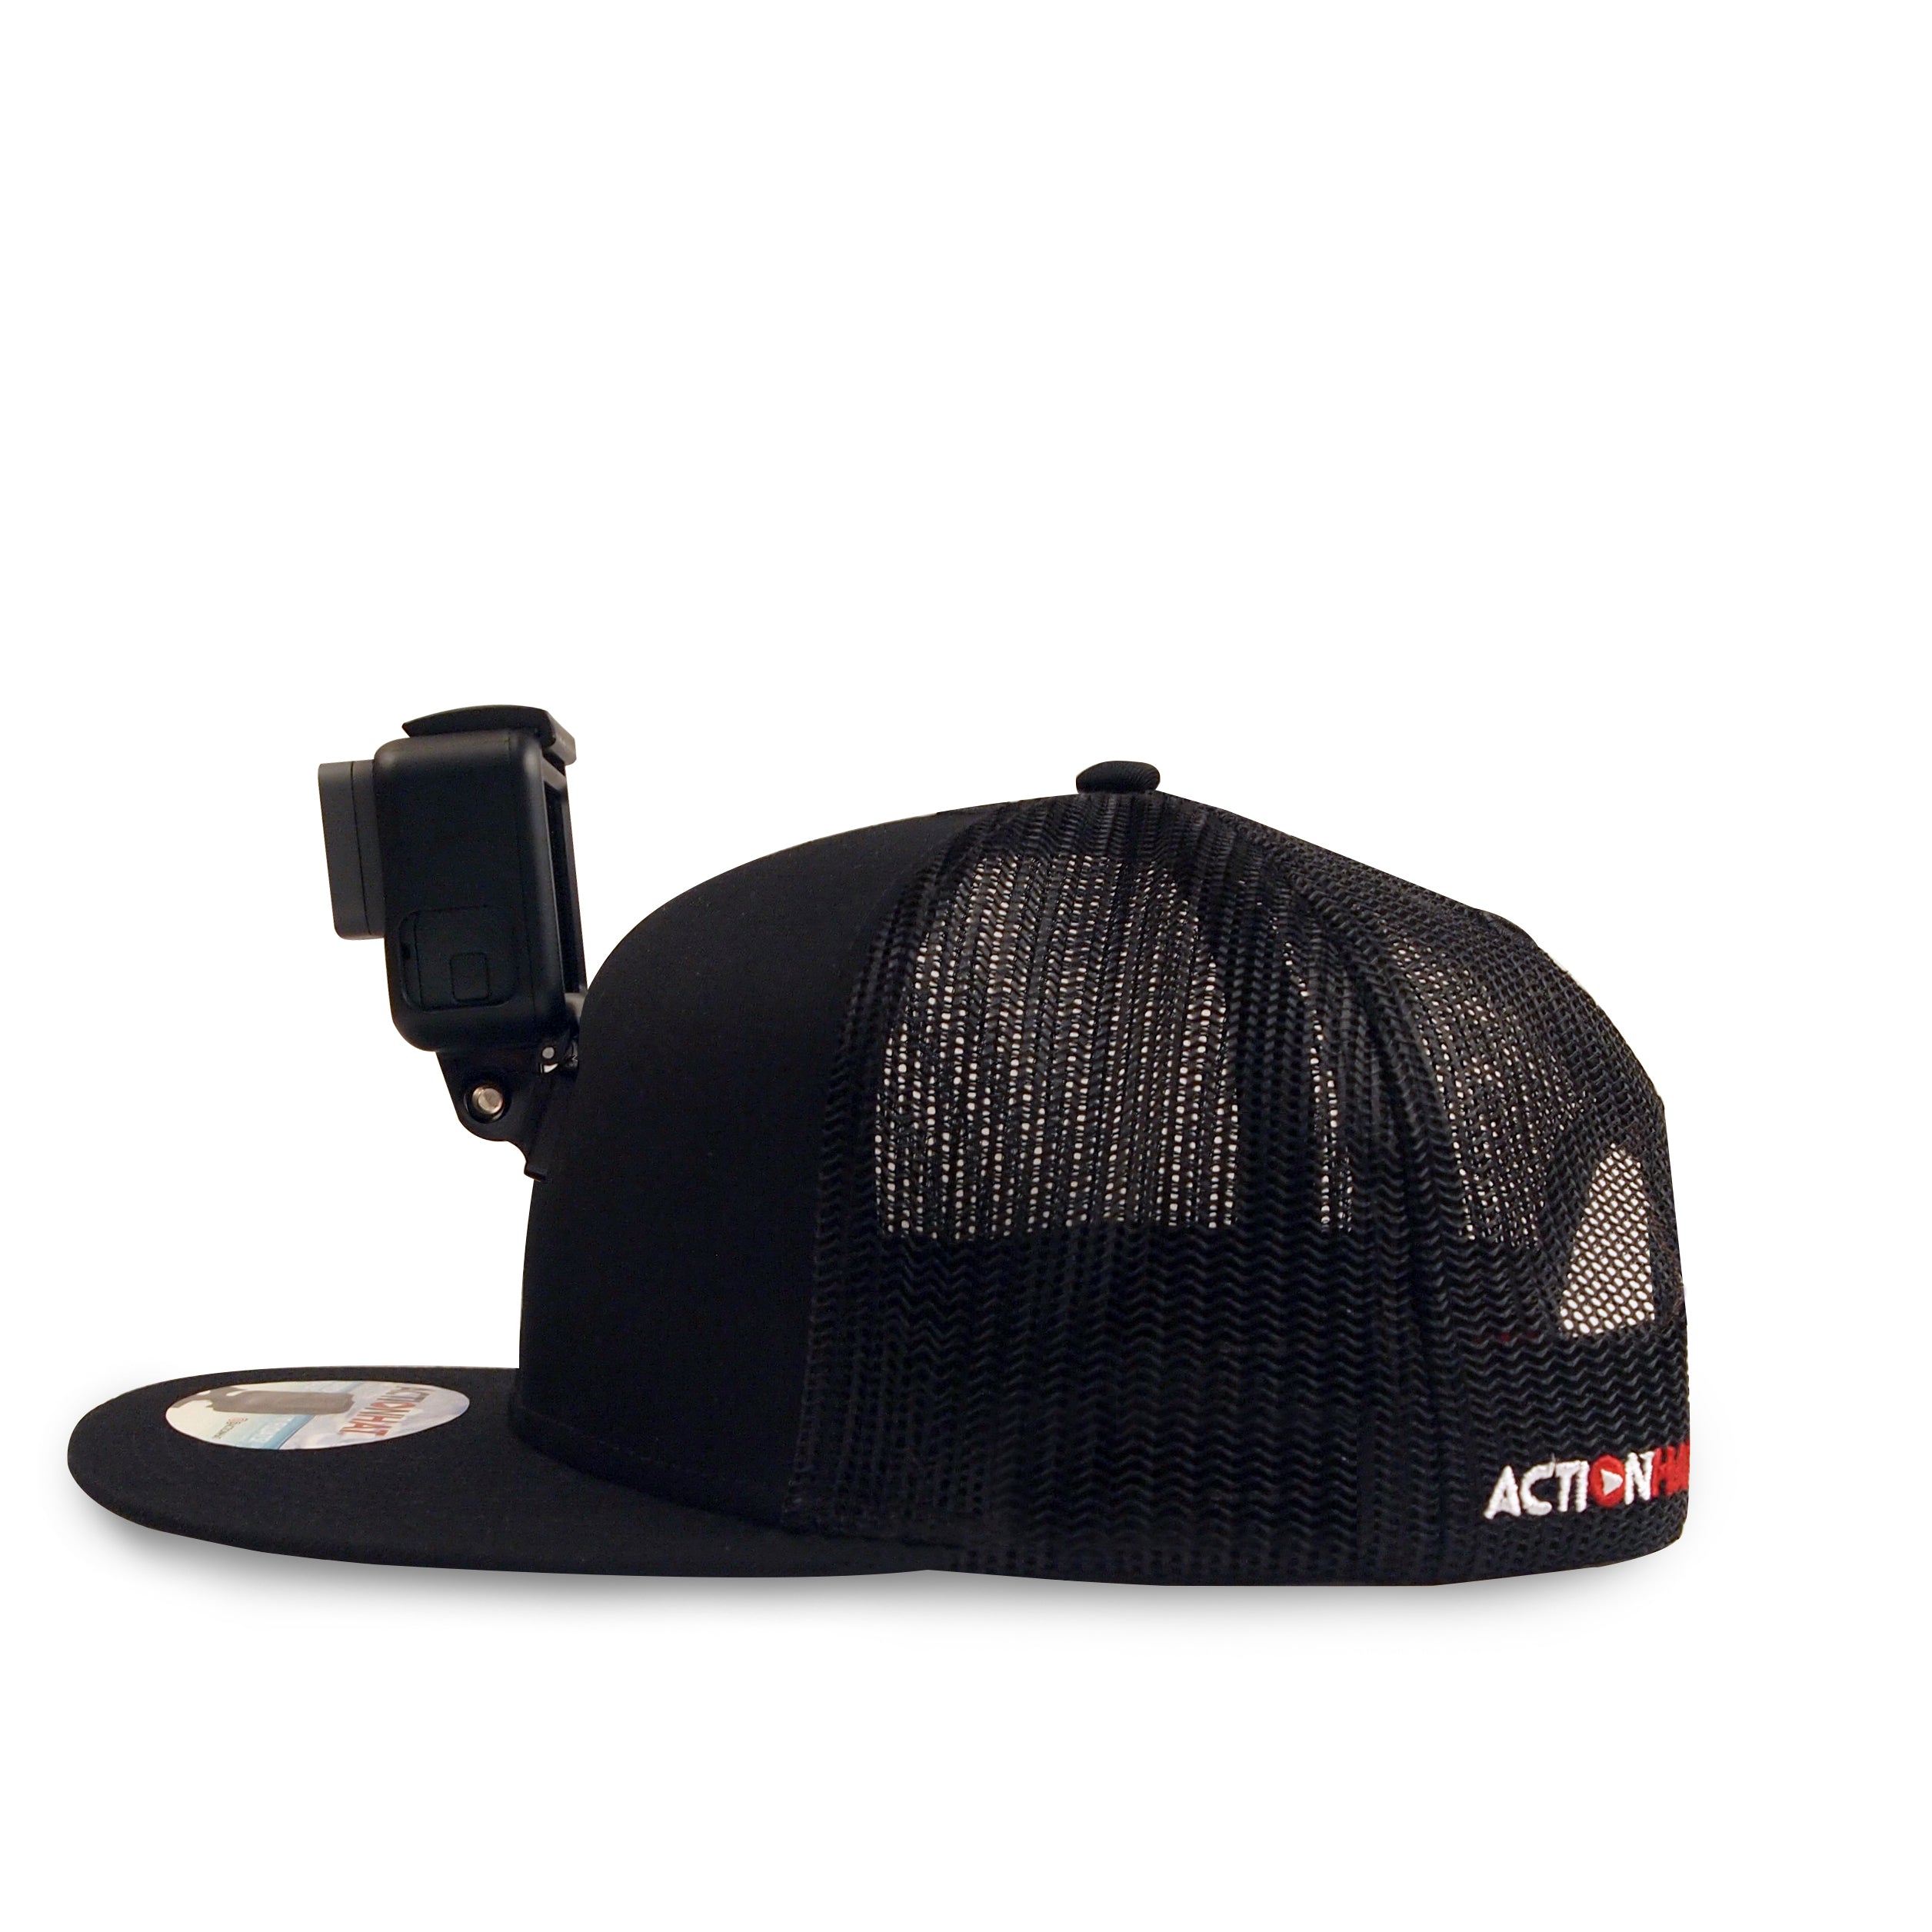 ActionHat Mesh: Gray Curve Bill - Hat Mount for GoPro